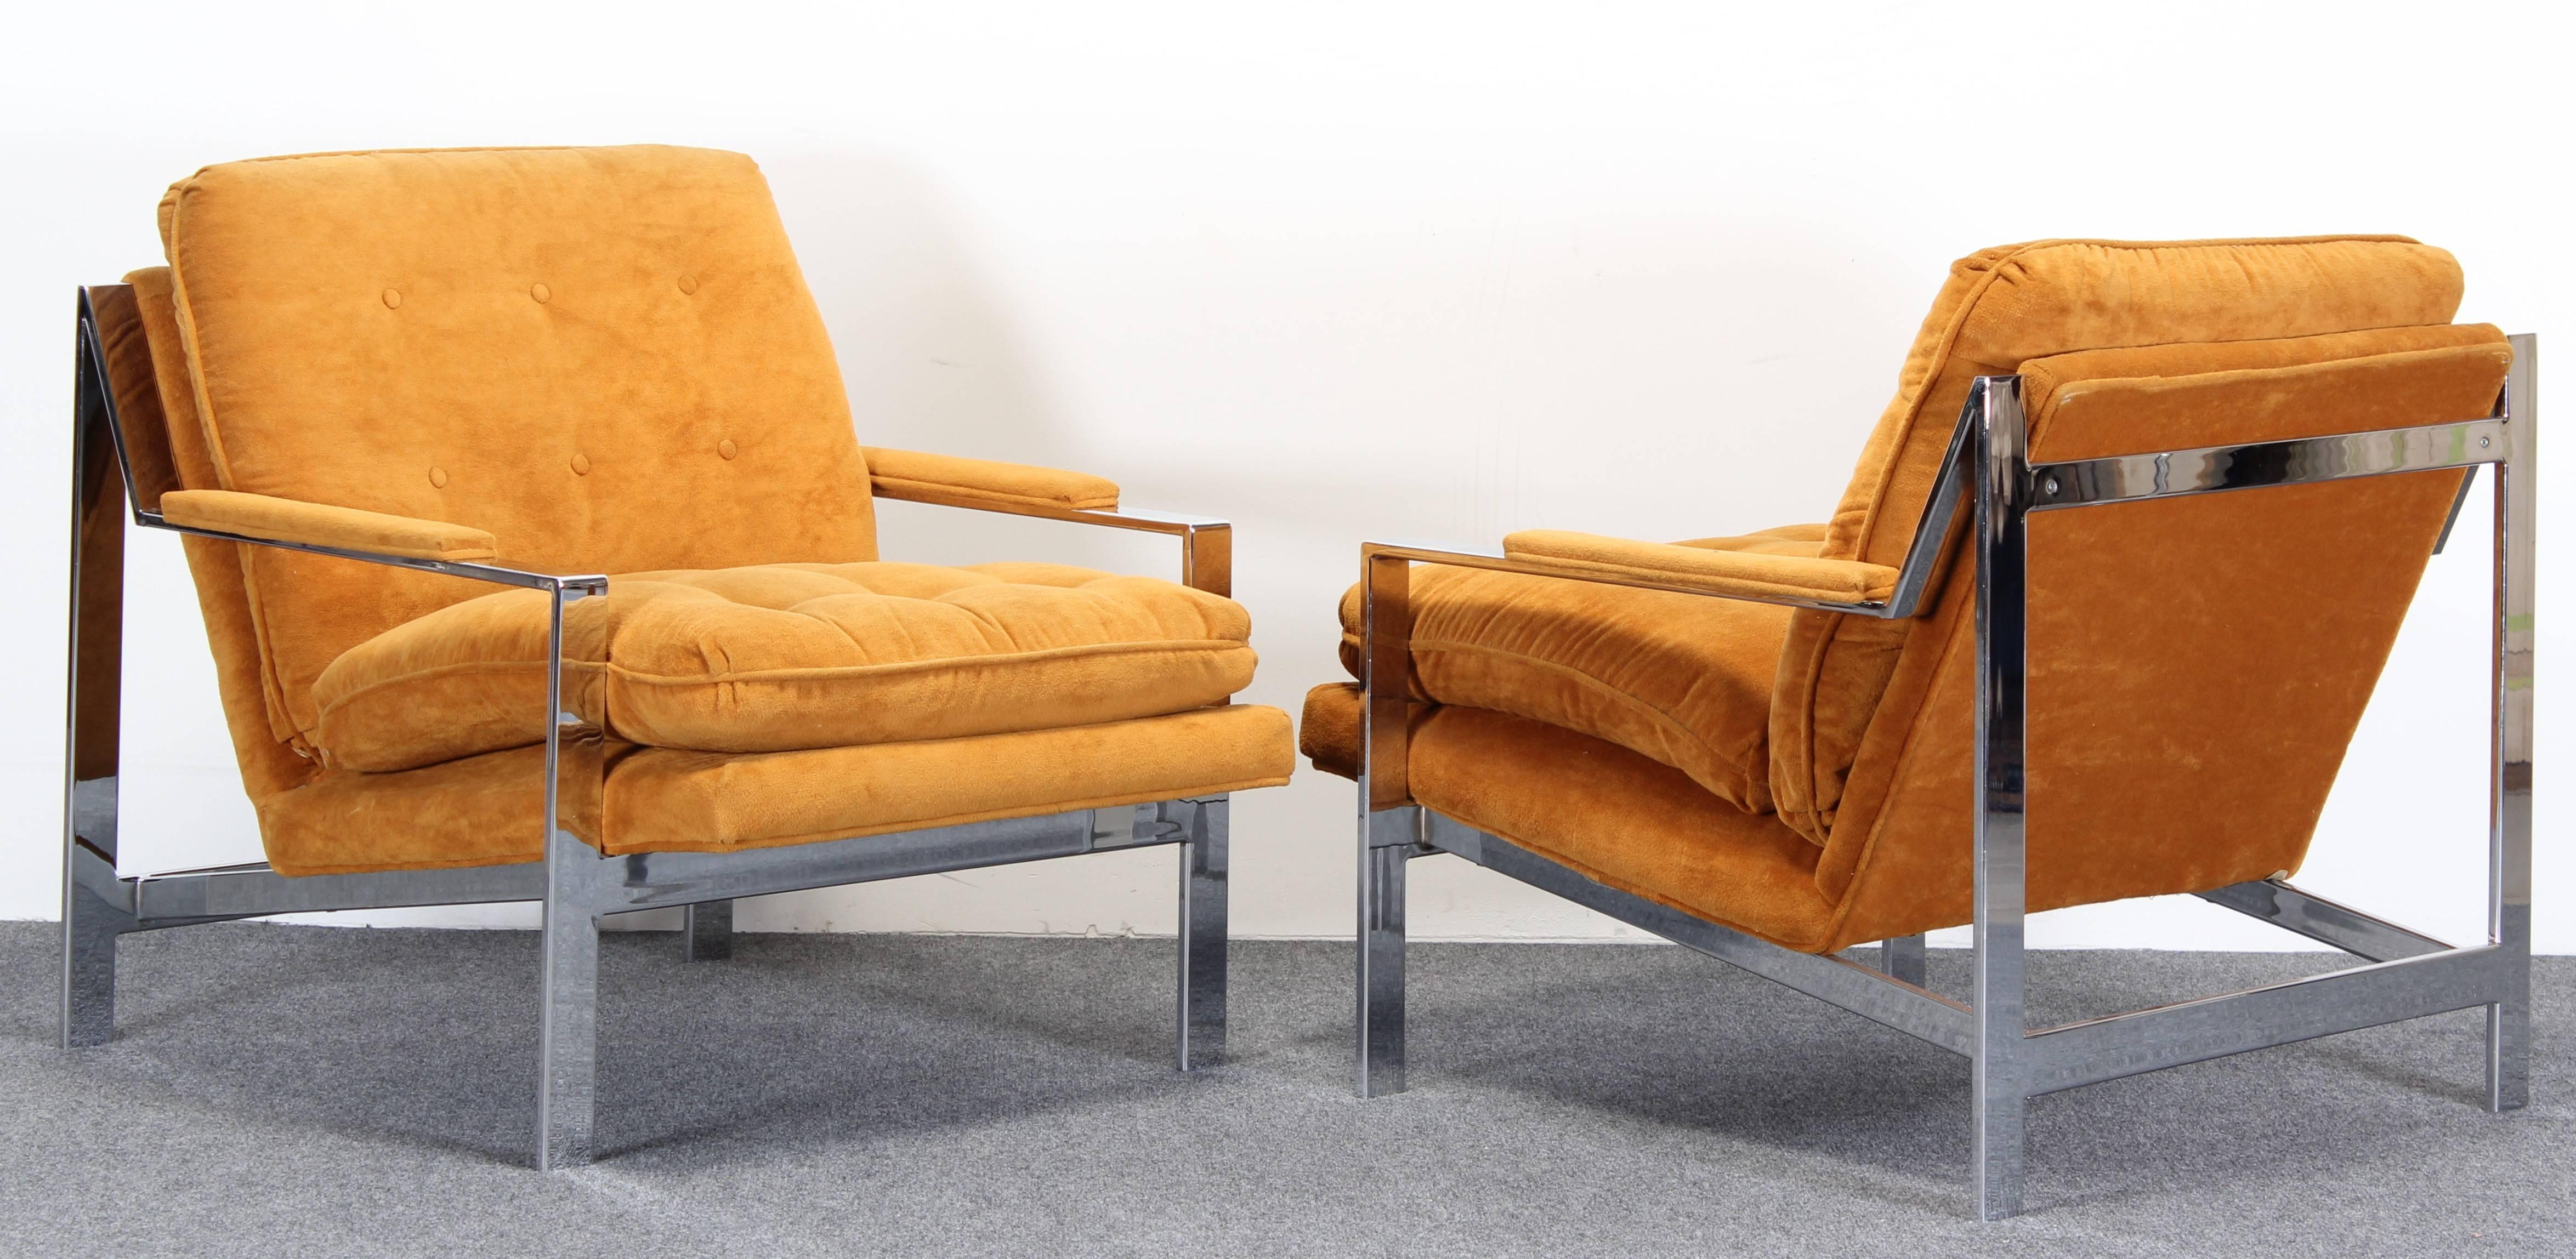 A great pair of chrome lounge chairs designed by Cy Mann. Chrome is in very good vintage condition as well as the original fabric. Some minor wear to corners on backs of chairs as shown in images. 